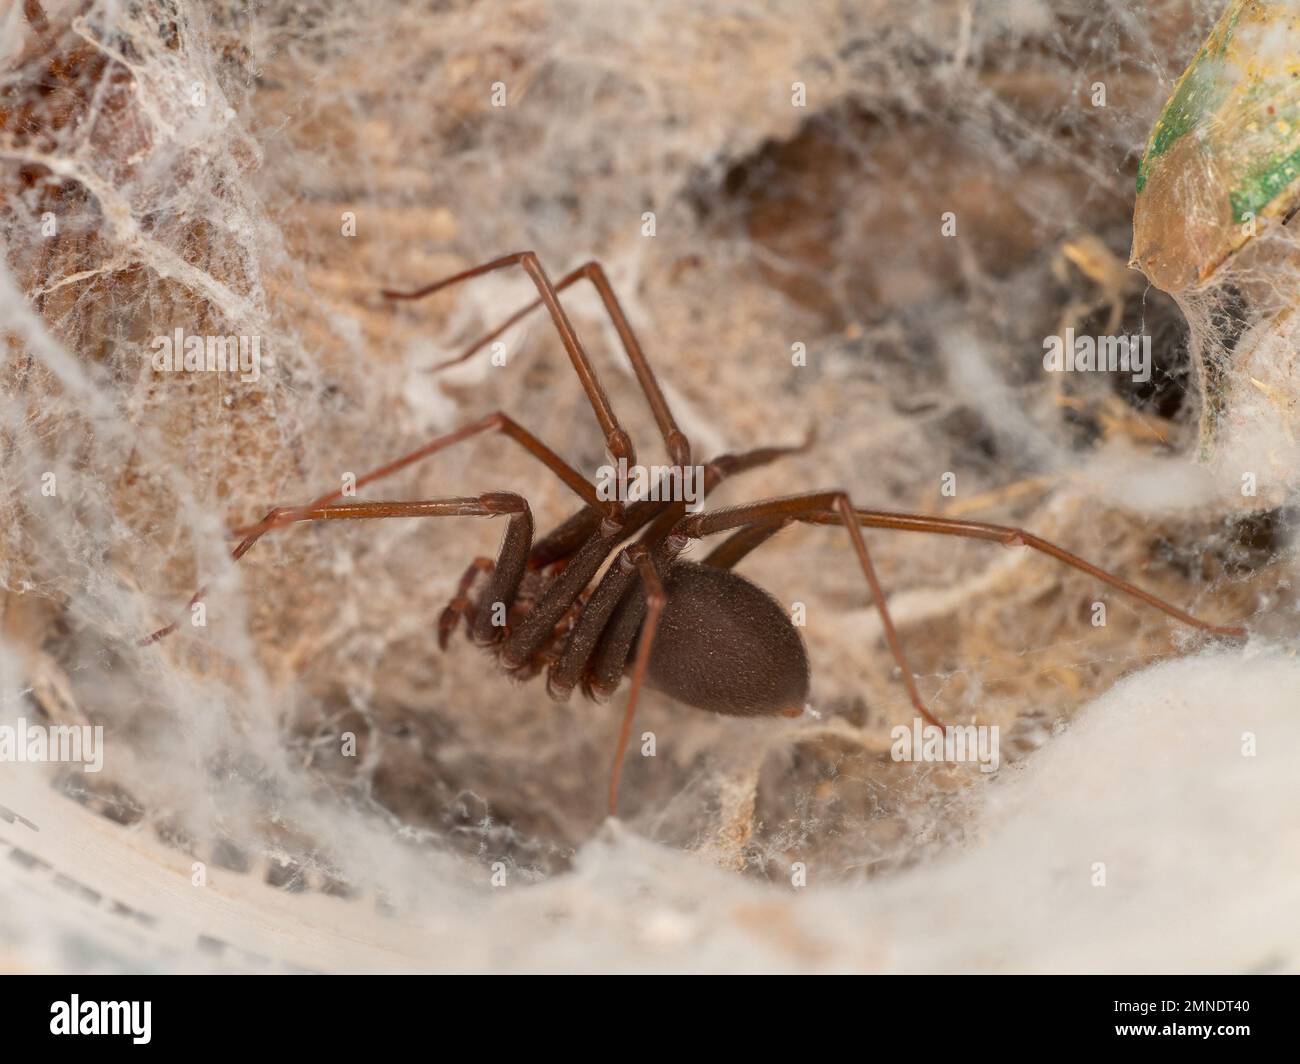 Detailed portrait of a Loxosceles (brown recluse spider), macrophotography of a venomous species with medically significant bites. Stock Photo